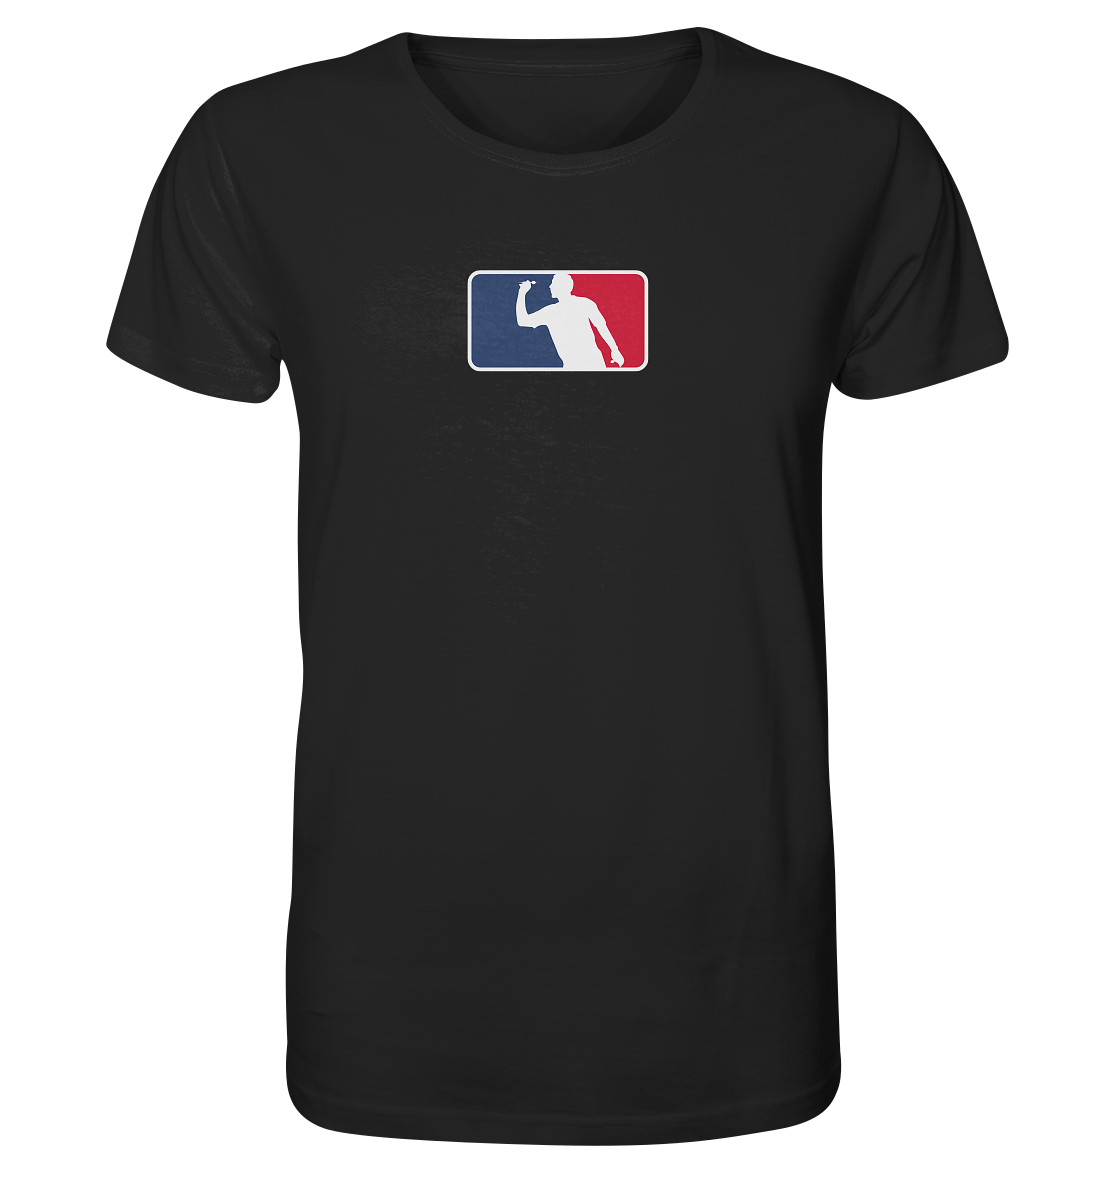 Small Player - T-Shirt